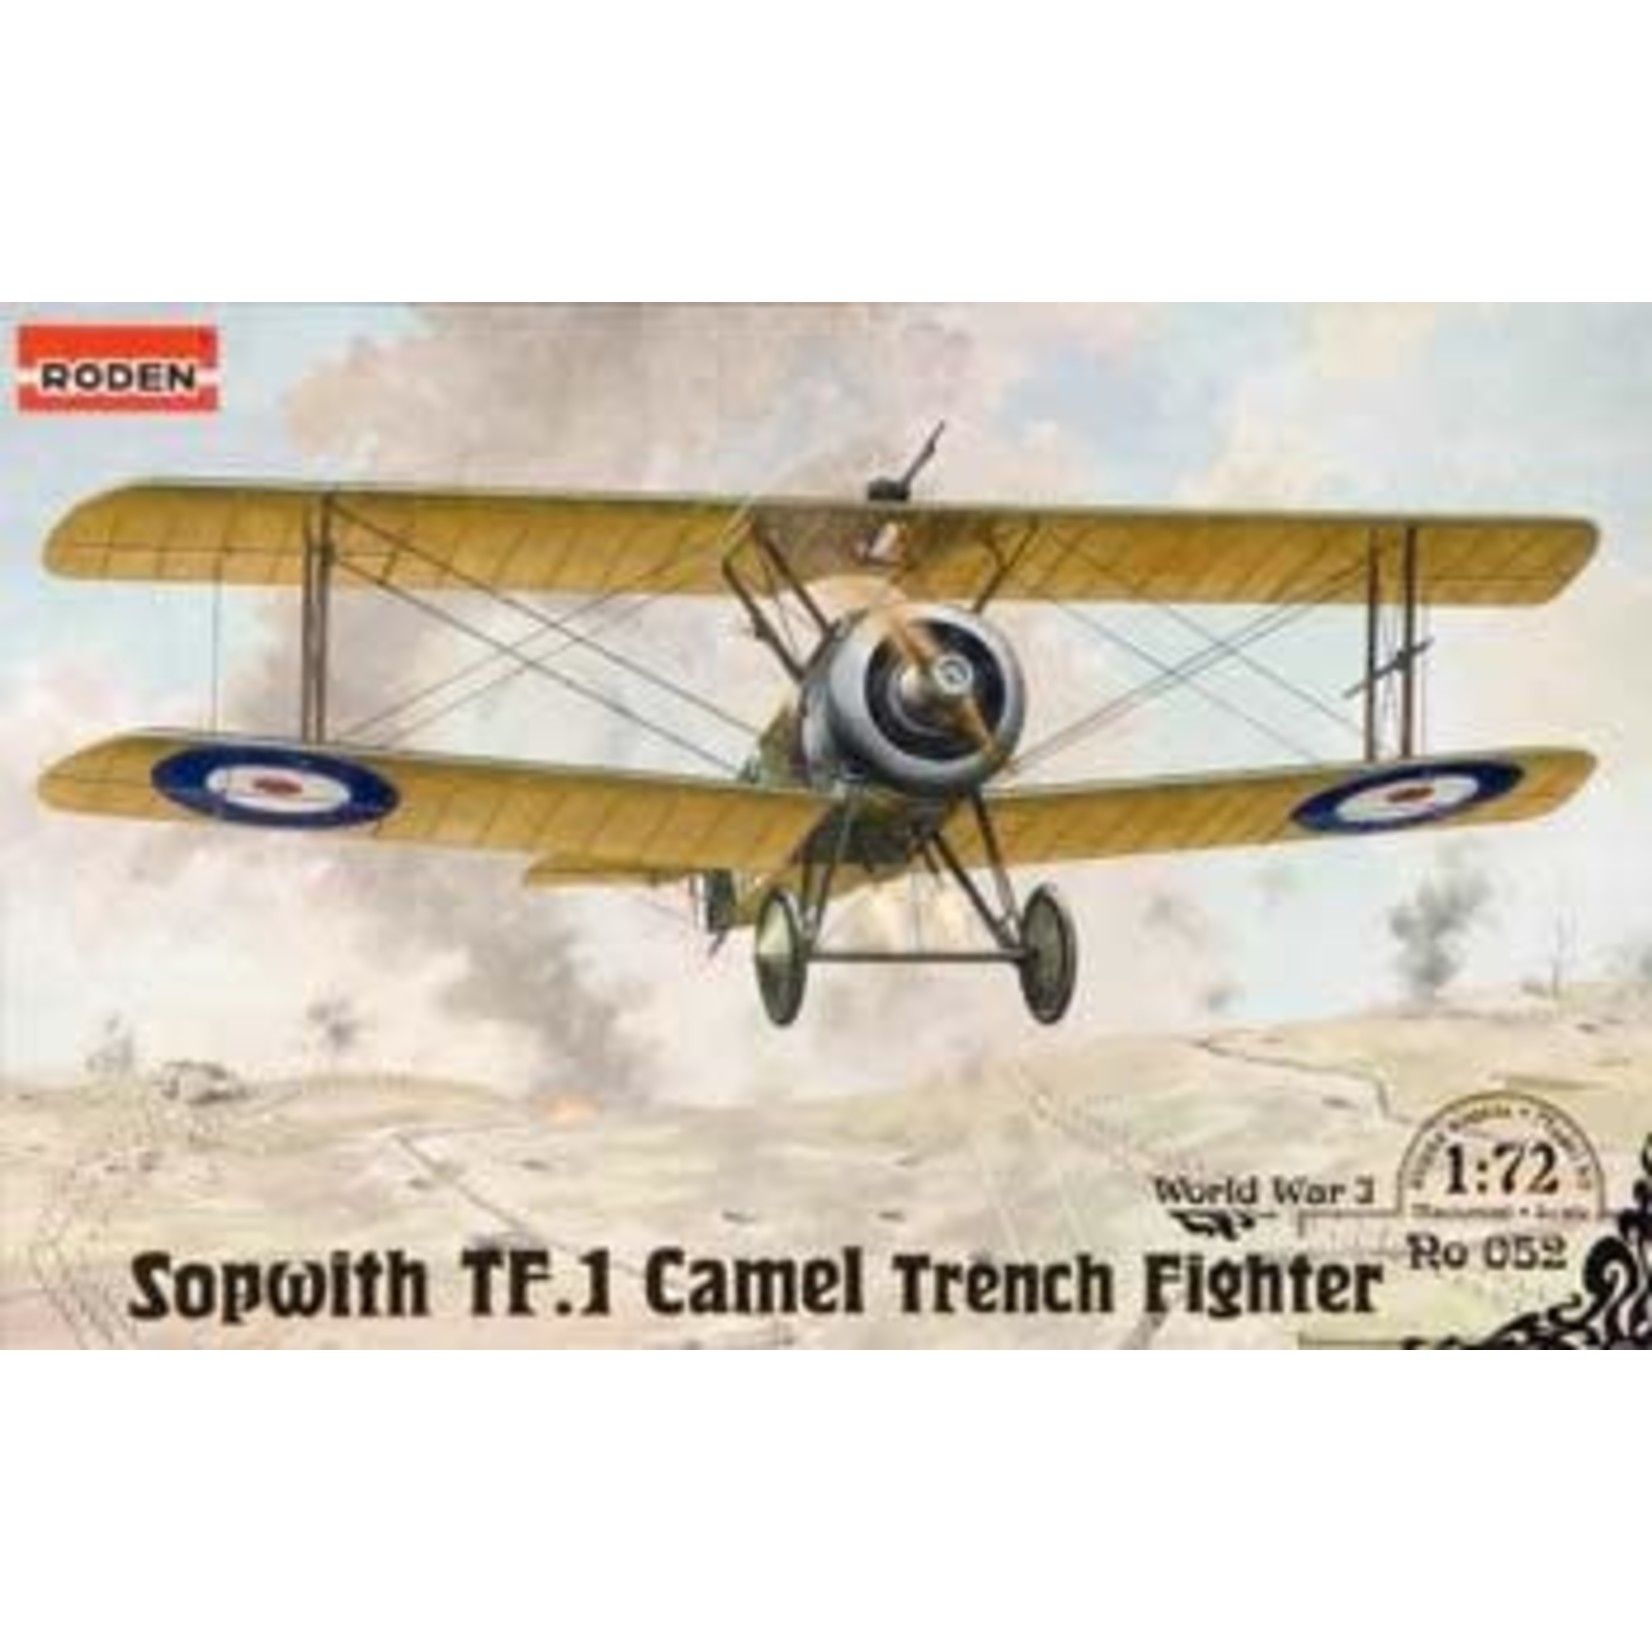 0052: Sopwith T.F.1 Camel Trench Fighter